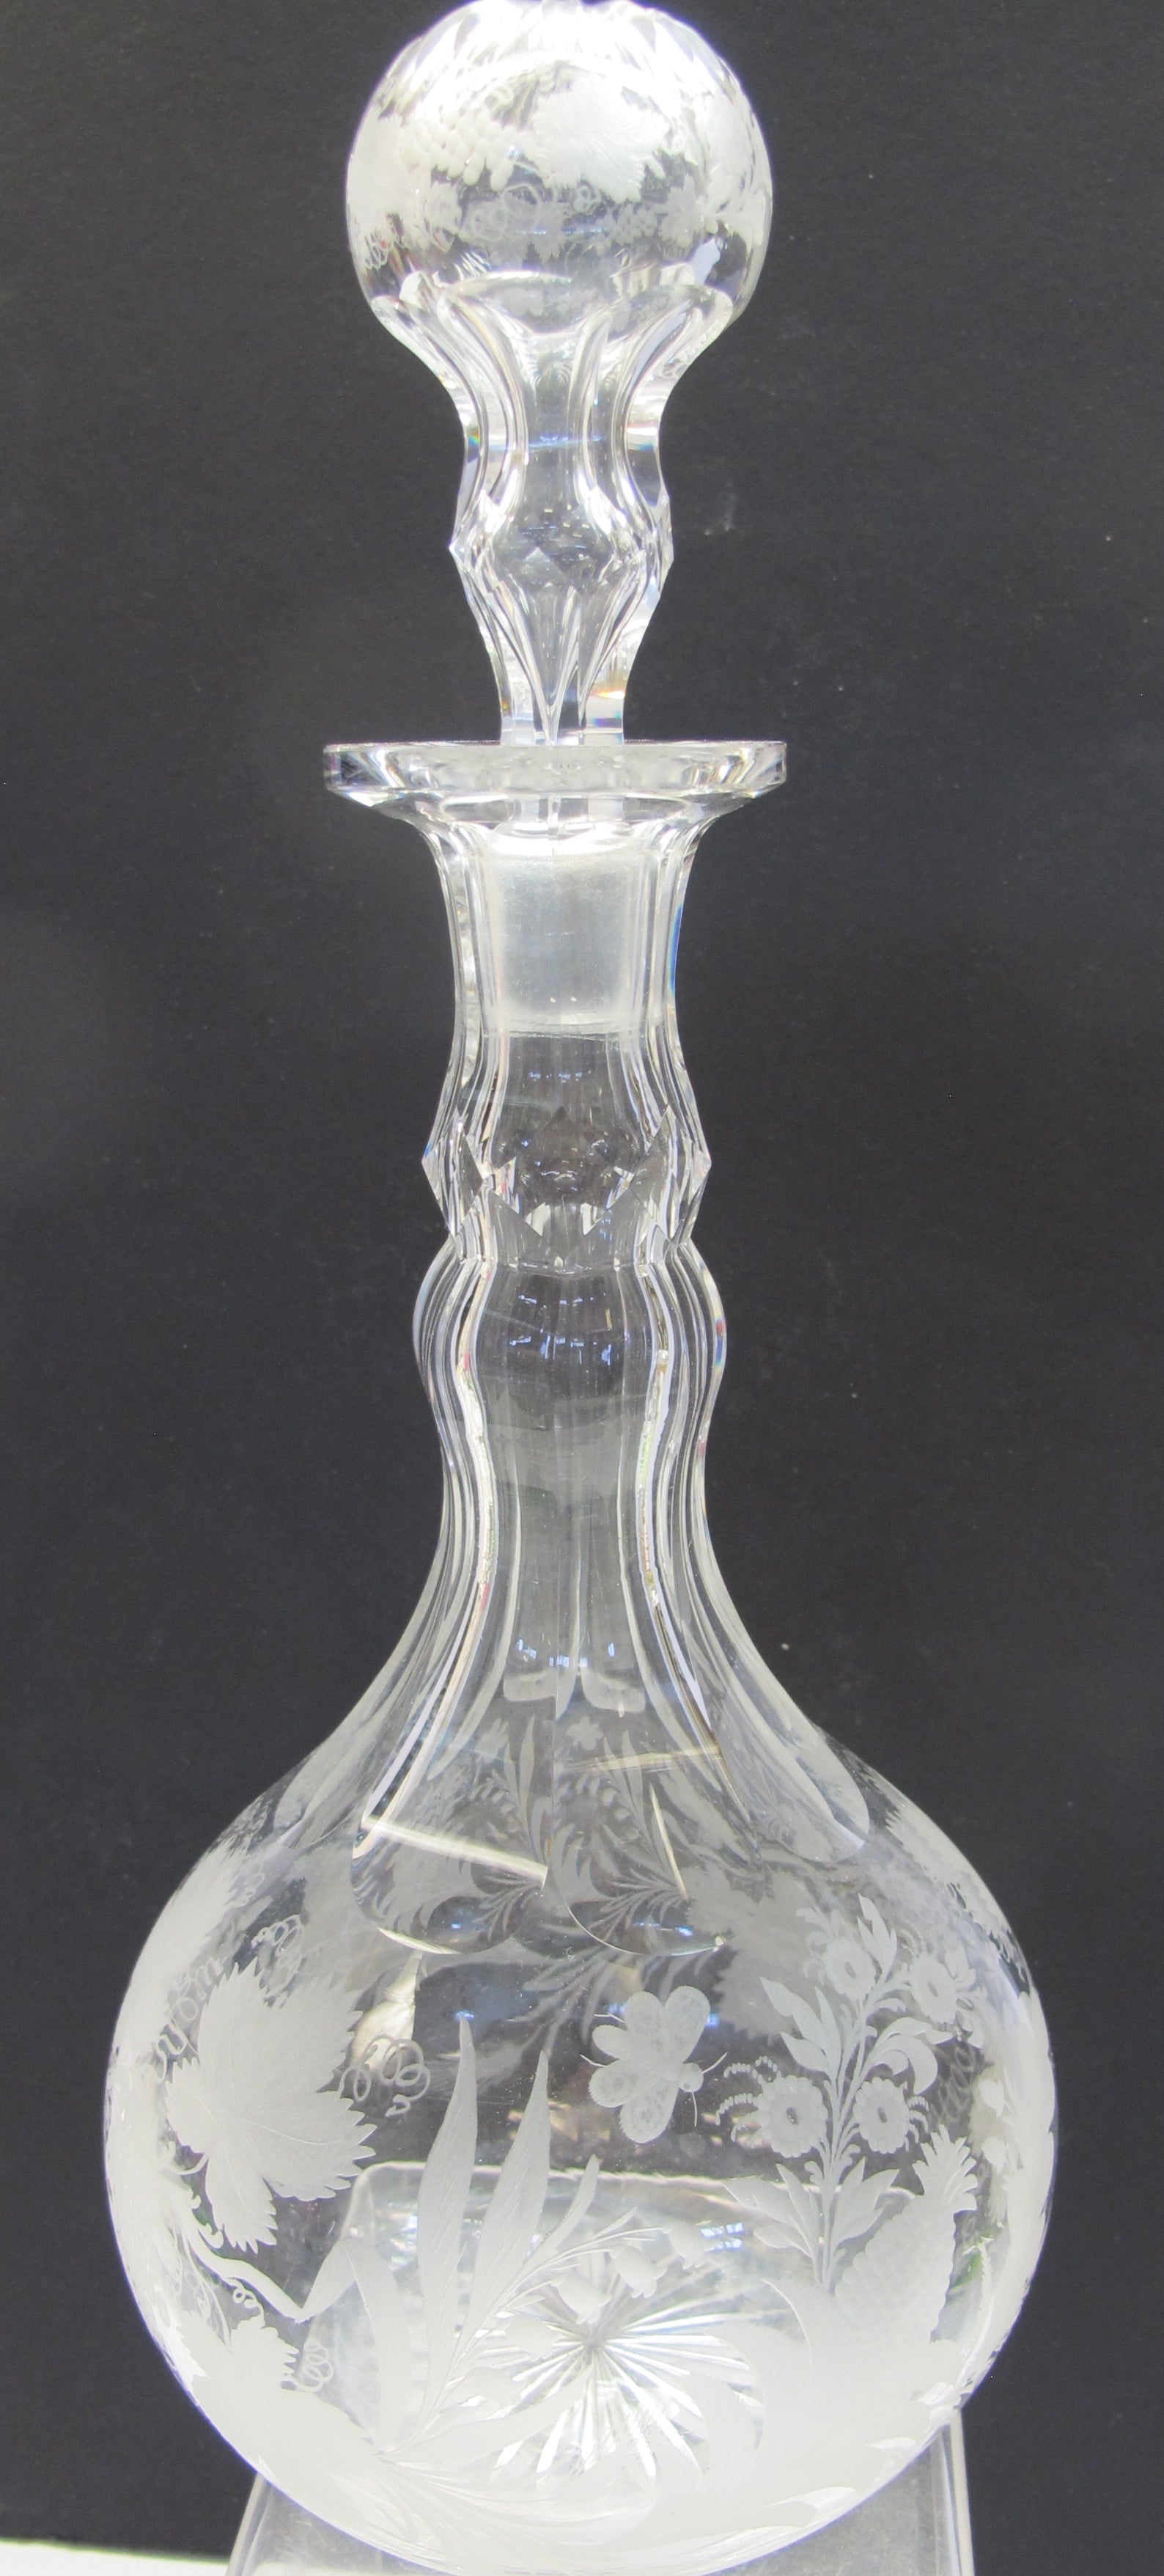 Hand copper wheel engraved decanter antique - O'Rourke crystal awards & gifts abp cut glass